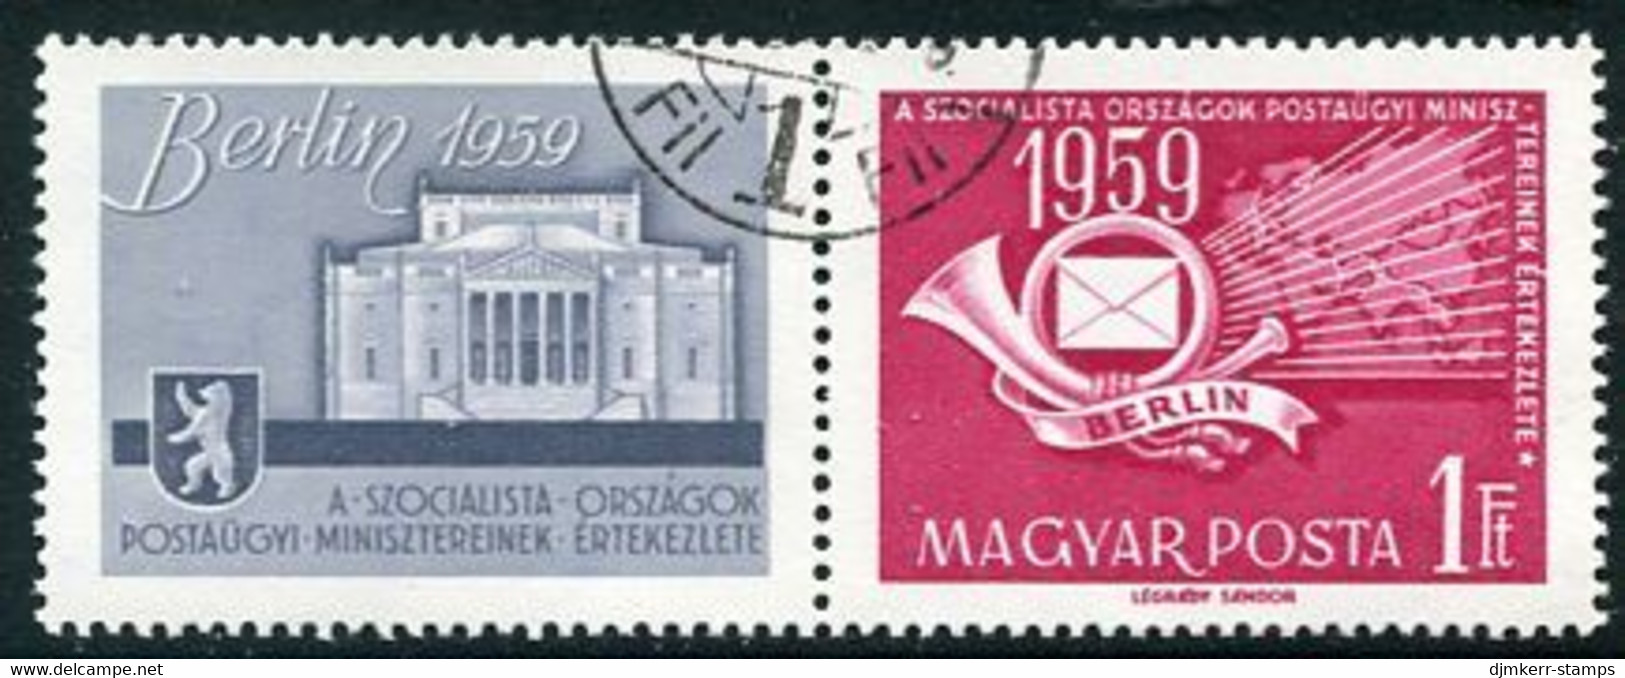 HUNGARY 1959 Socialist Minister's Postal Conference   Used.  Michel 1592 - Gebraucht